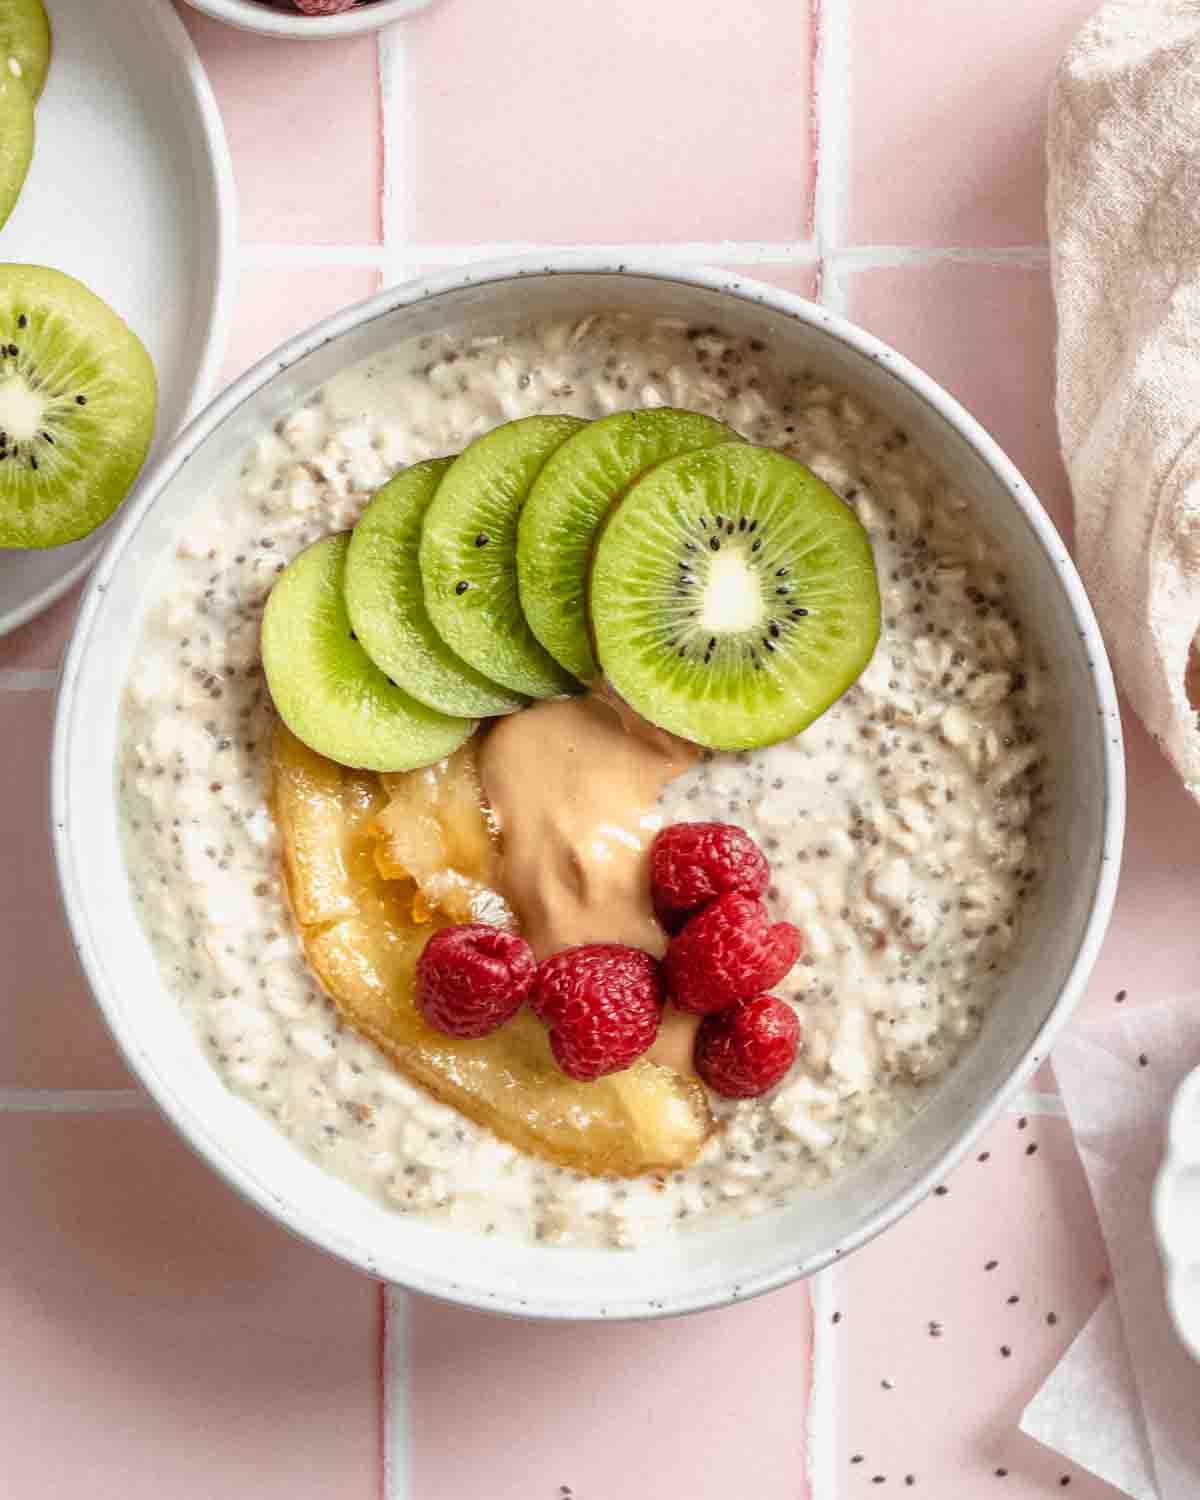 overnight oats in a bowl topped with kiwi, raspberries, caramelized banana and peanut butter.